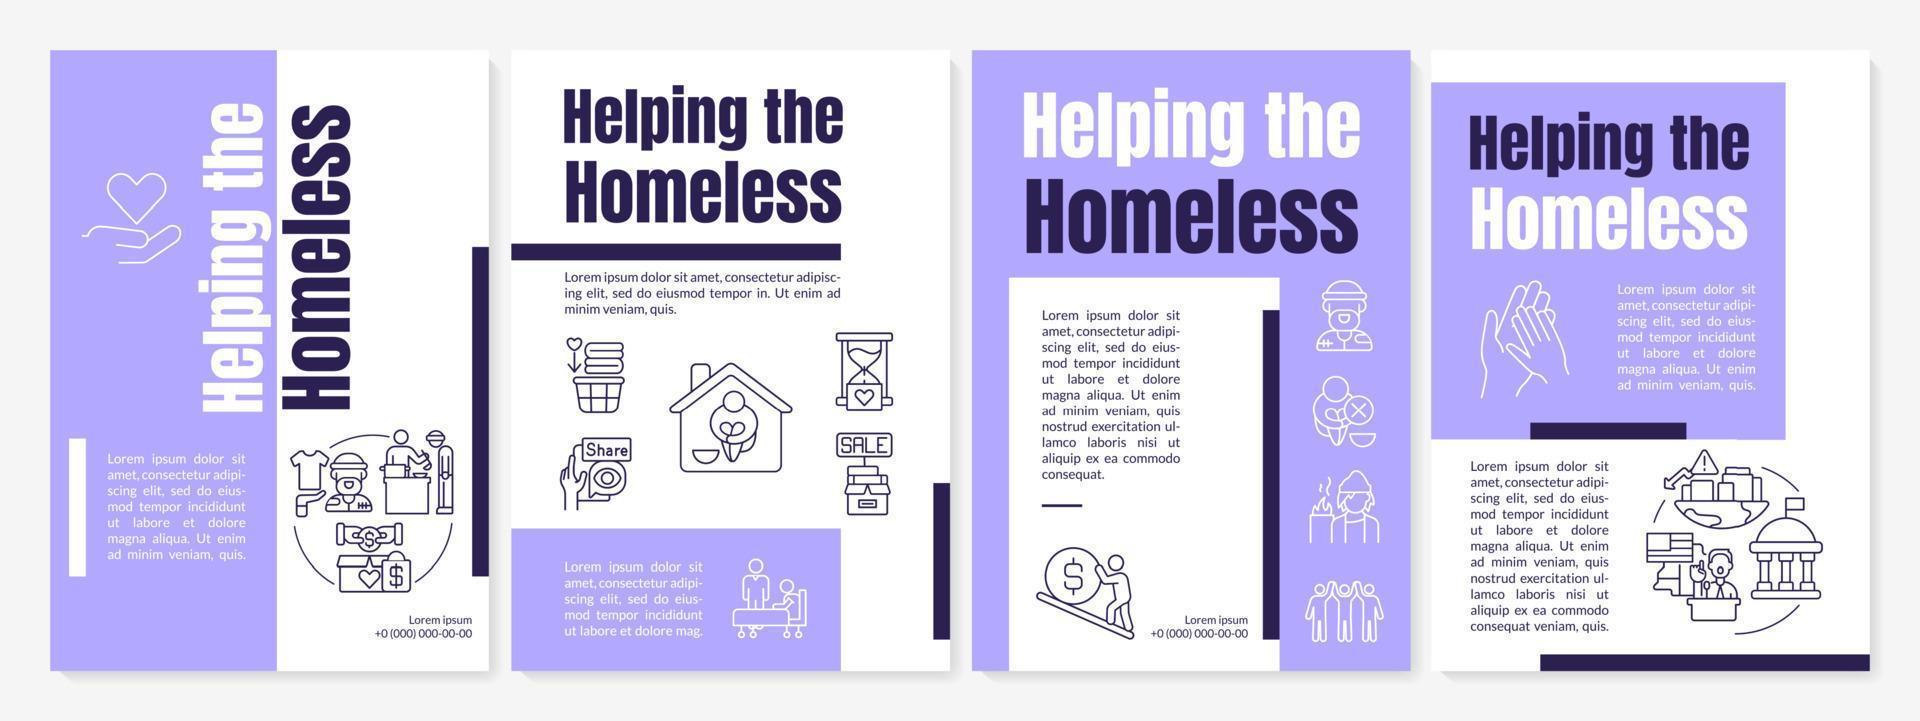 Assisting homeless people purple brochure template. Emergency shelter. Leaflet design with linear icons. 4 vector layouts for presentation, annual reports.